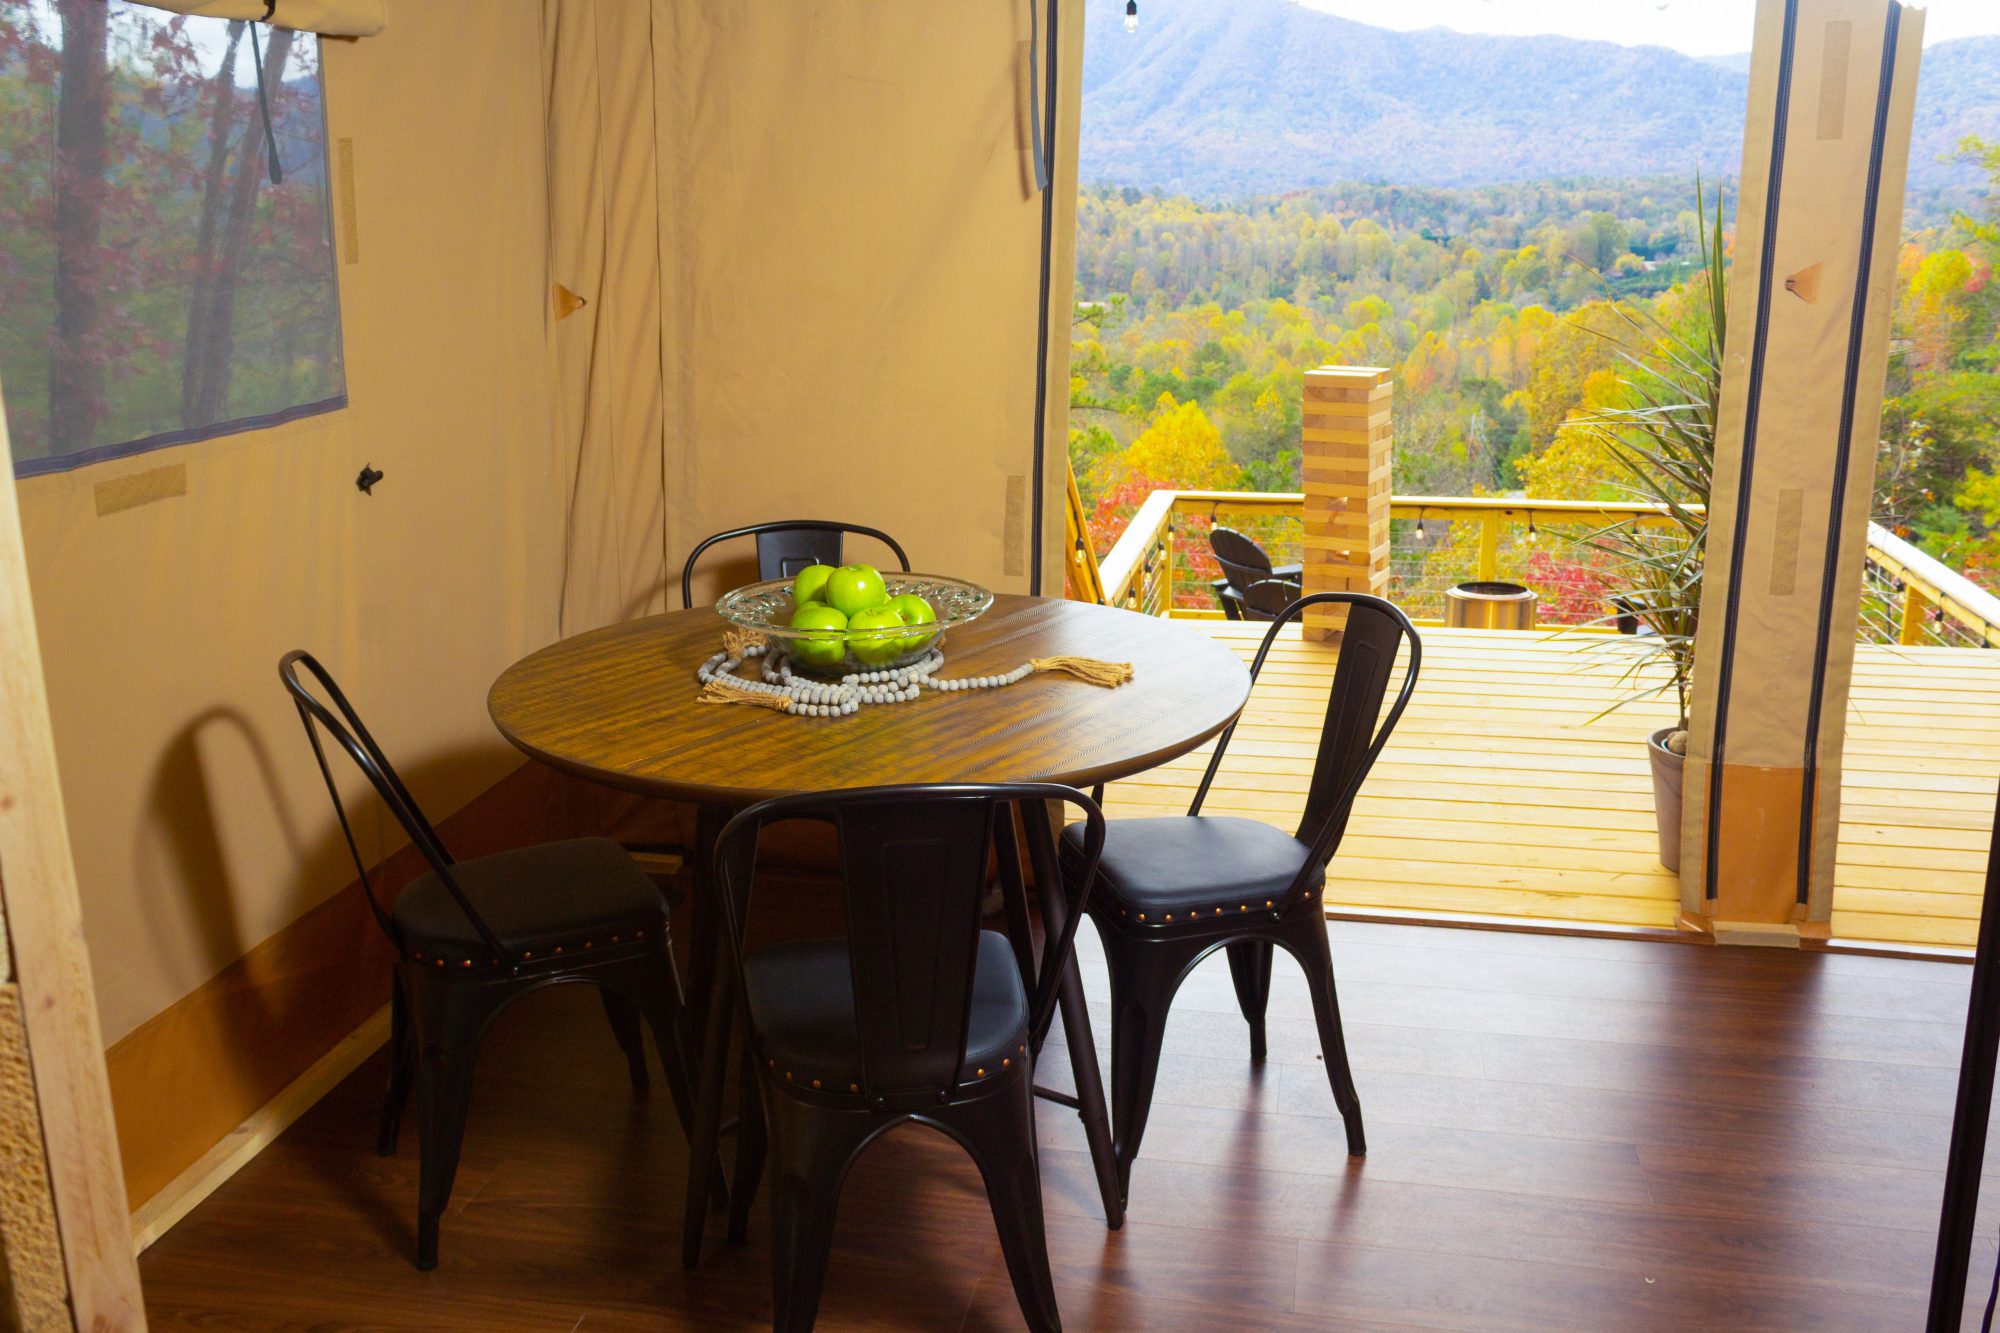 From cabins to elevated tents, Thunderhead Ridge Cabin Rentals offers a unique variety of ways to stay comfortably in the Smoky Mountains! Each of our properties is equipped with amenities to make your stay a memorable one.